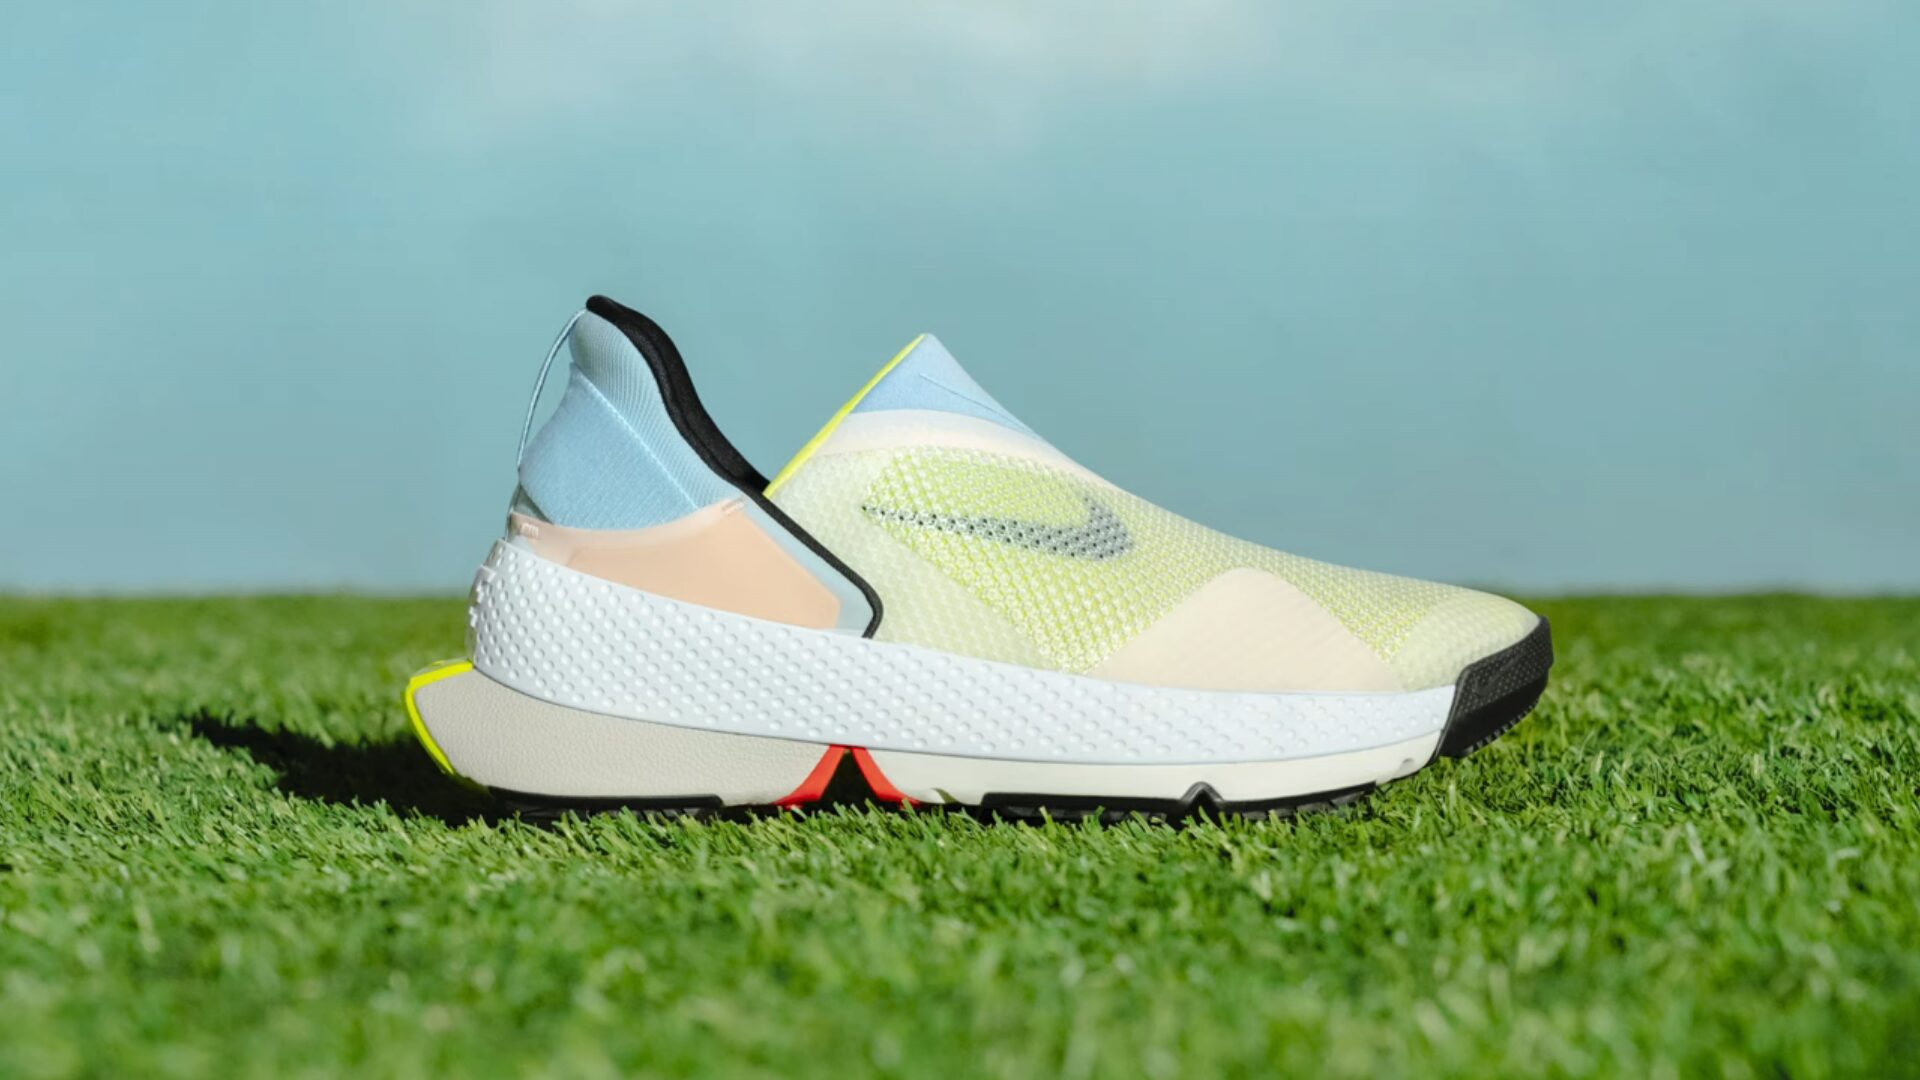 Nike’s New Shoes Feature Ability To Take Them On And Off Without Touching Them